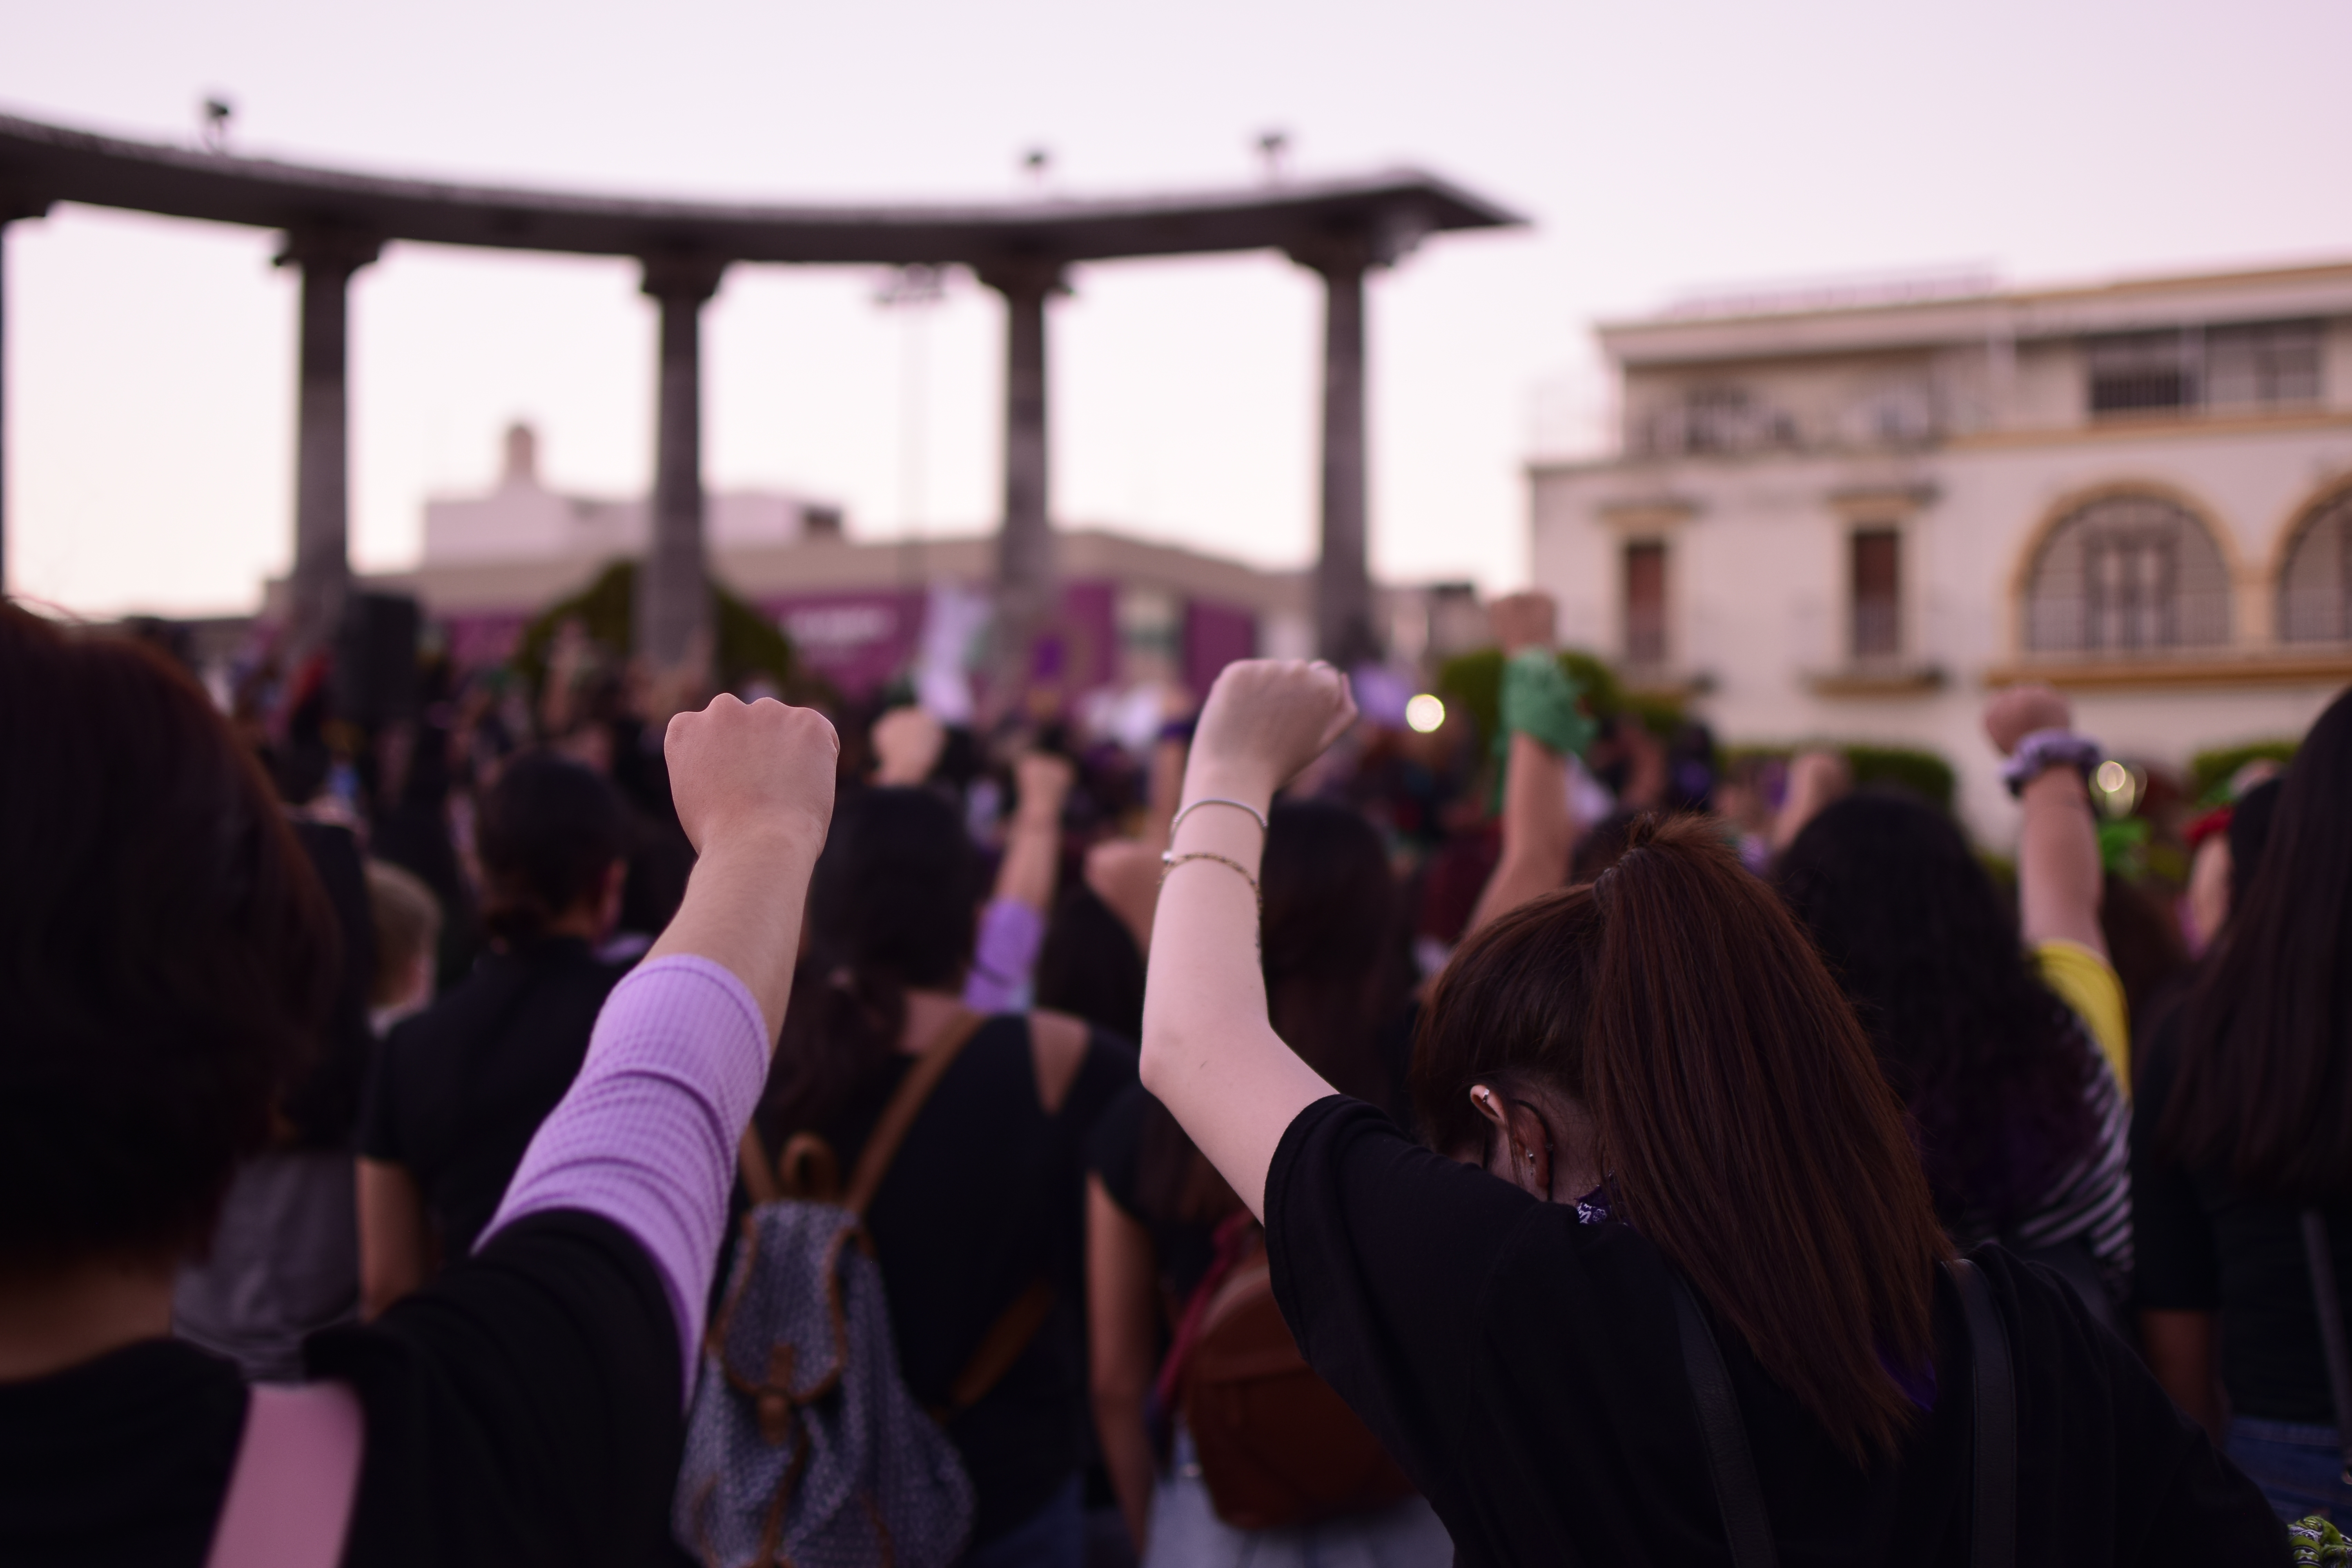 feminist march, empowered women with their fists raised